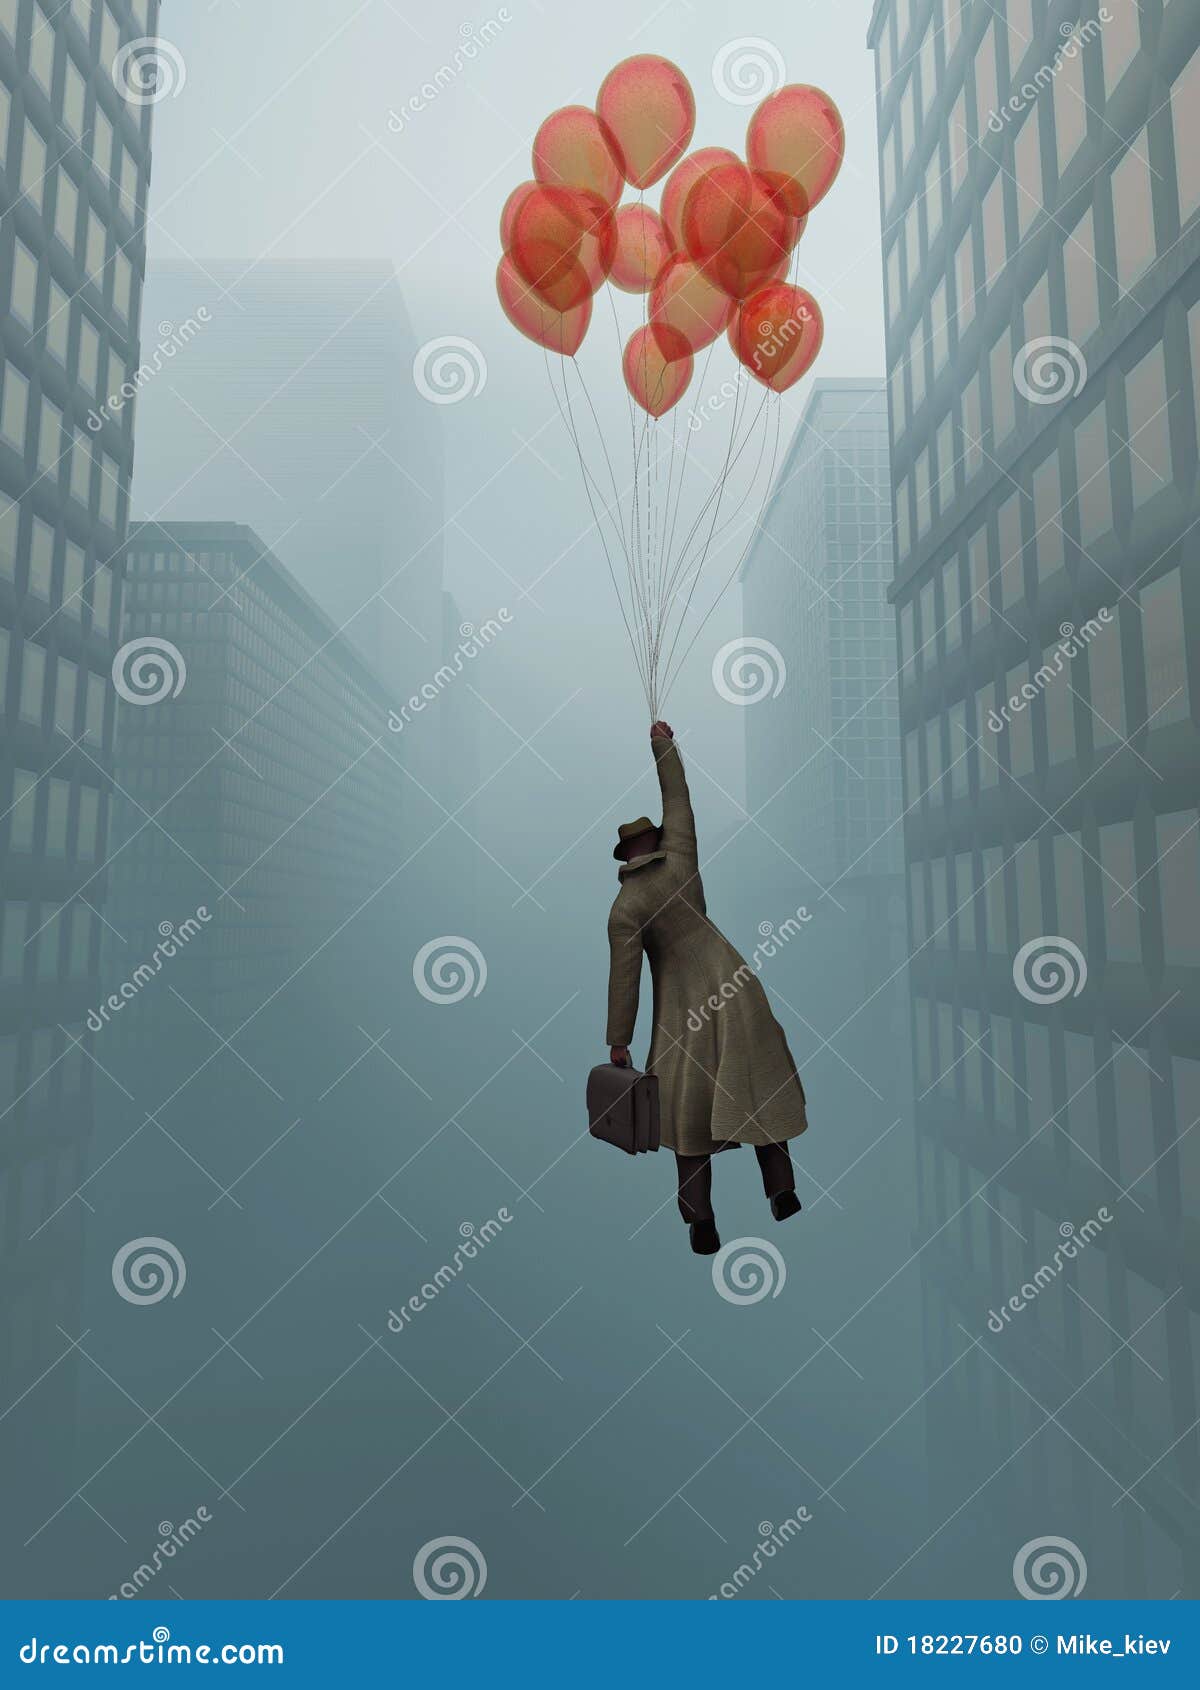 businessman soaring on balloon in city